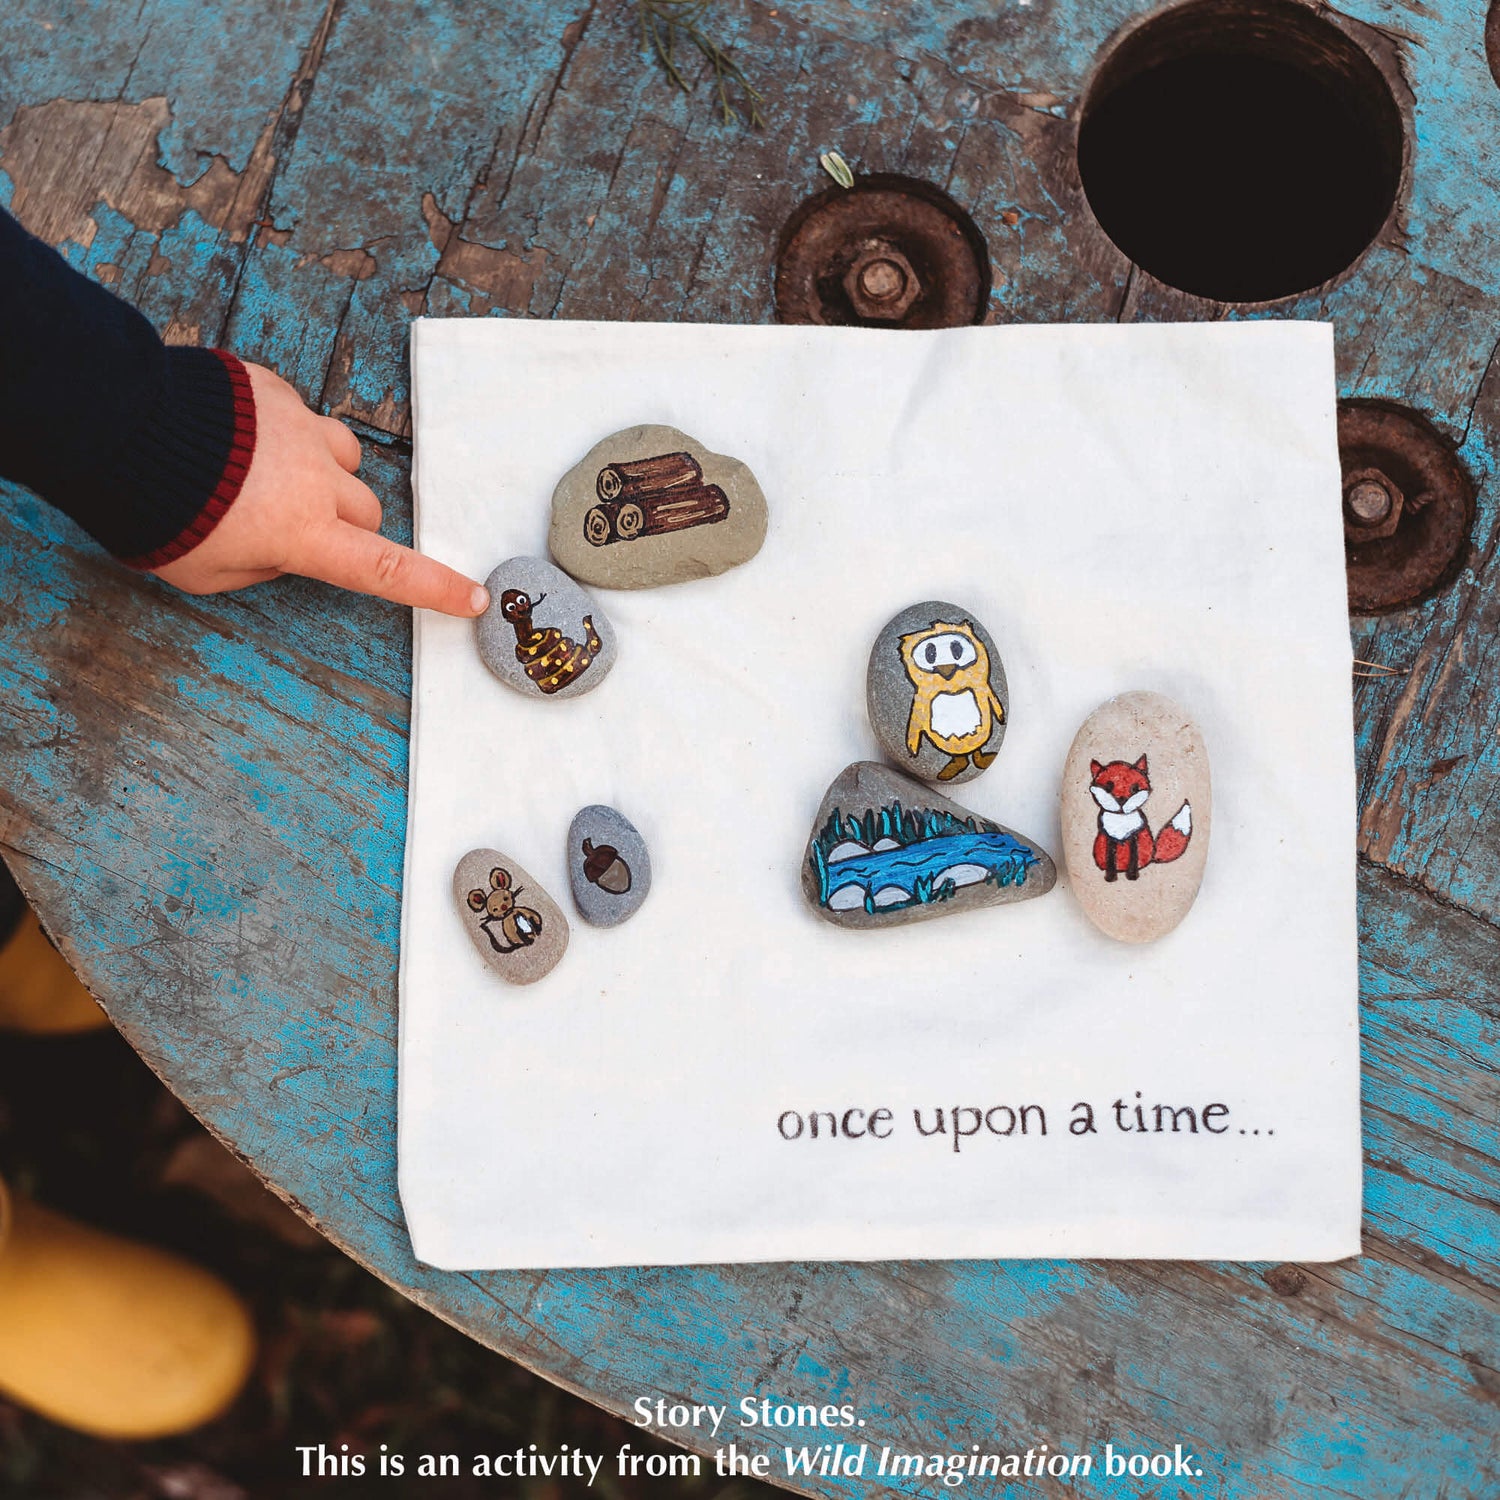 Story stones using paint pens as featured in Nature Craft Starter Pack from Your Wild Books includes Wild Imagination book, Wild Child book, paint pens in classic colours and an opinel beginners whittling knife. Save 20%